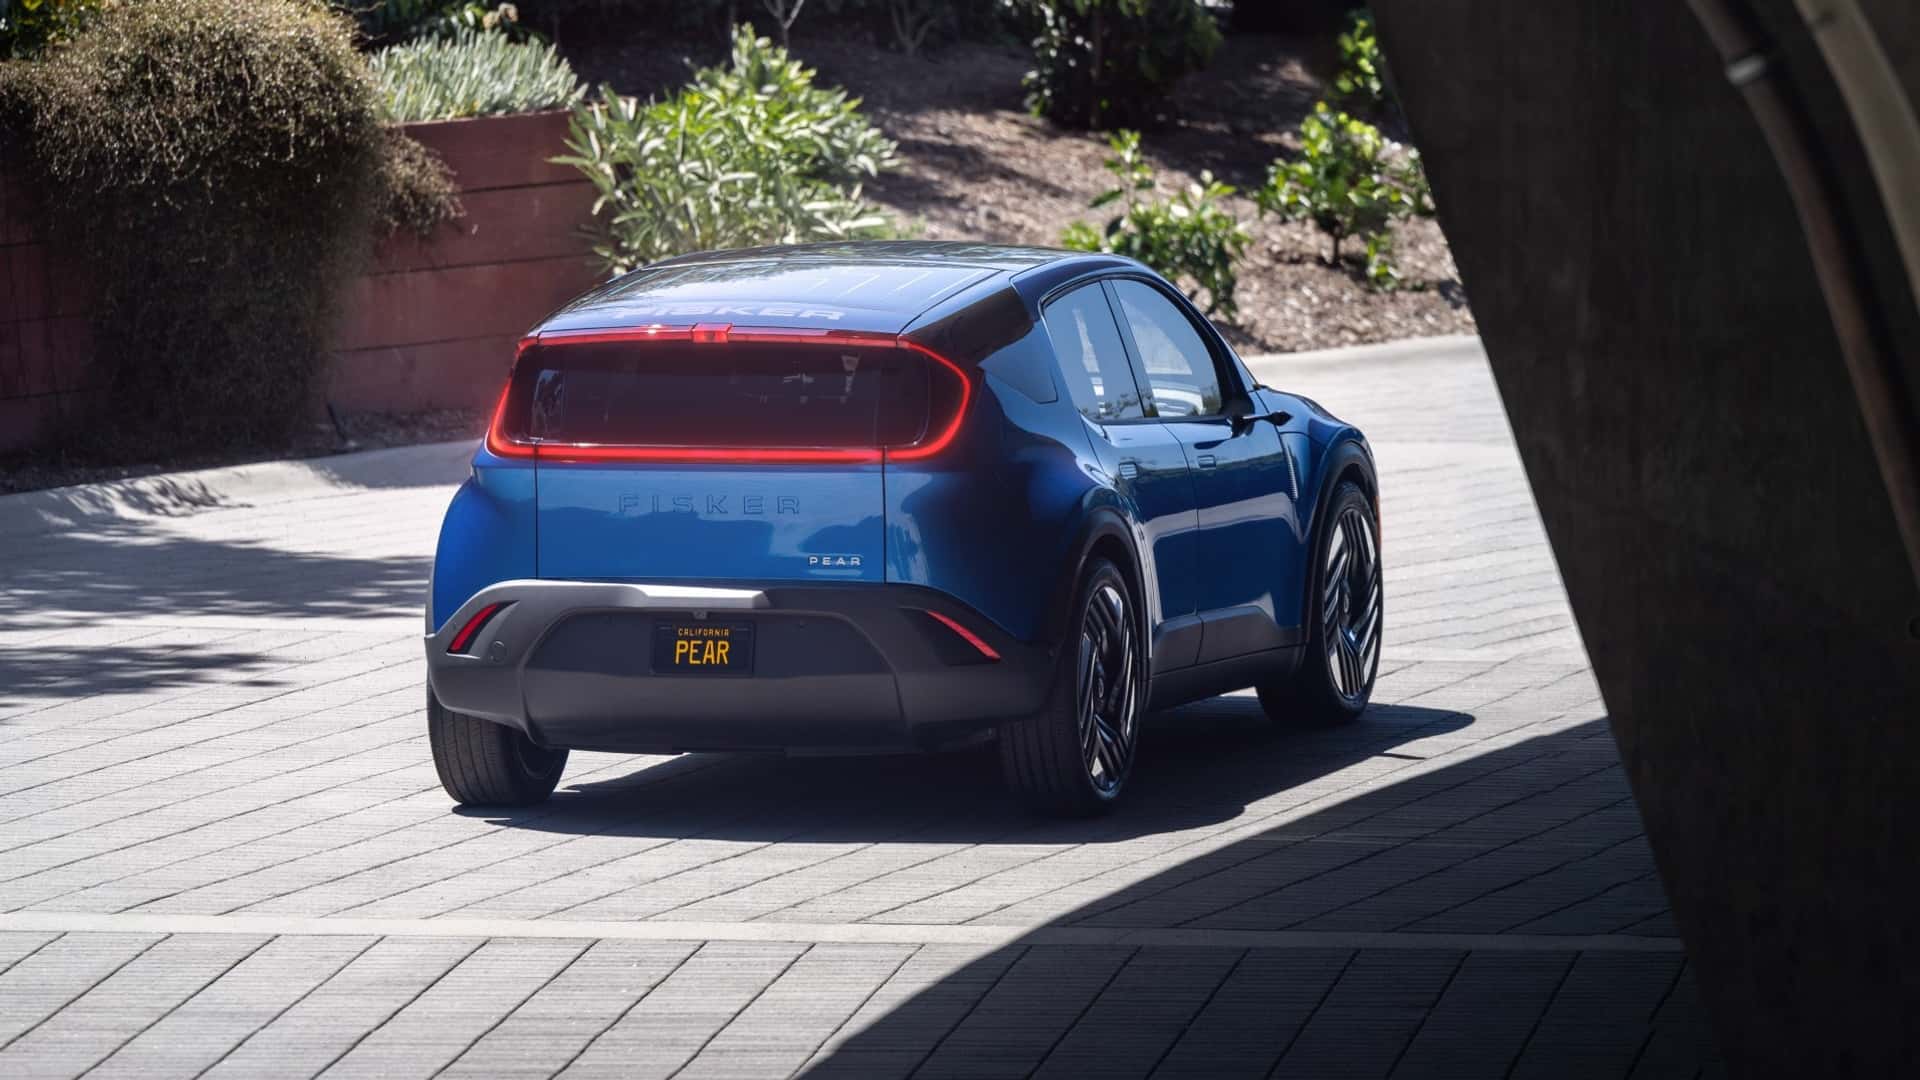 Fisker Pear electric crossover promises up to 320 miles of range